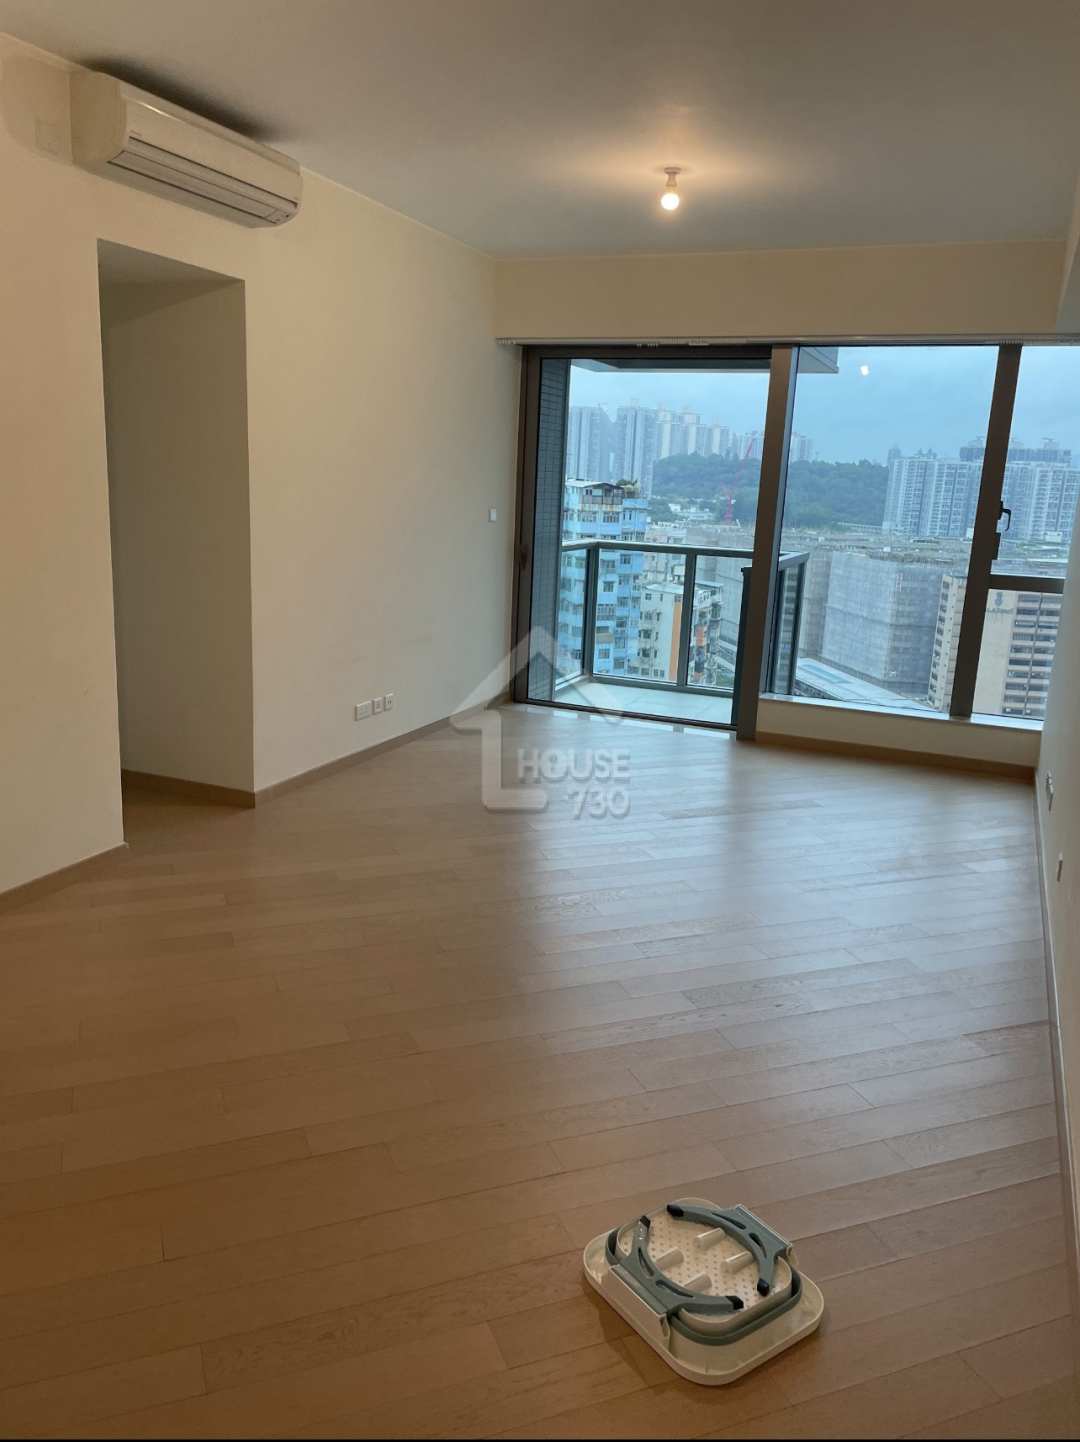 Kwun Tong GRAND CENTRAL Middle Floor Living Room House730-5138807